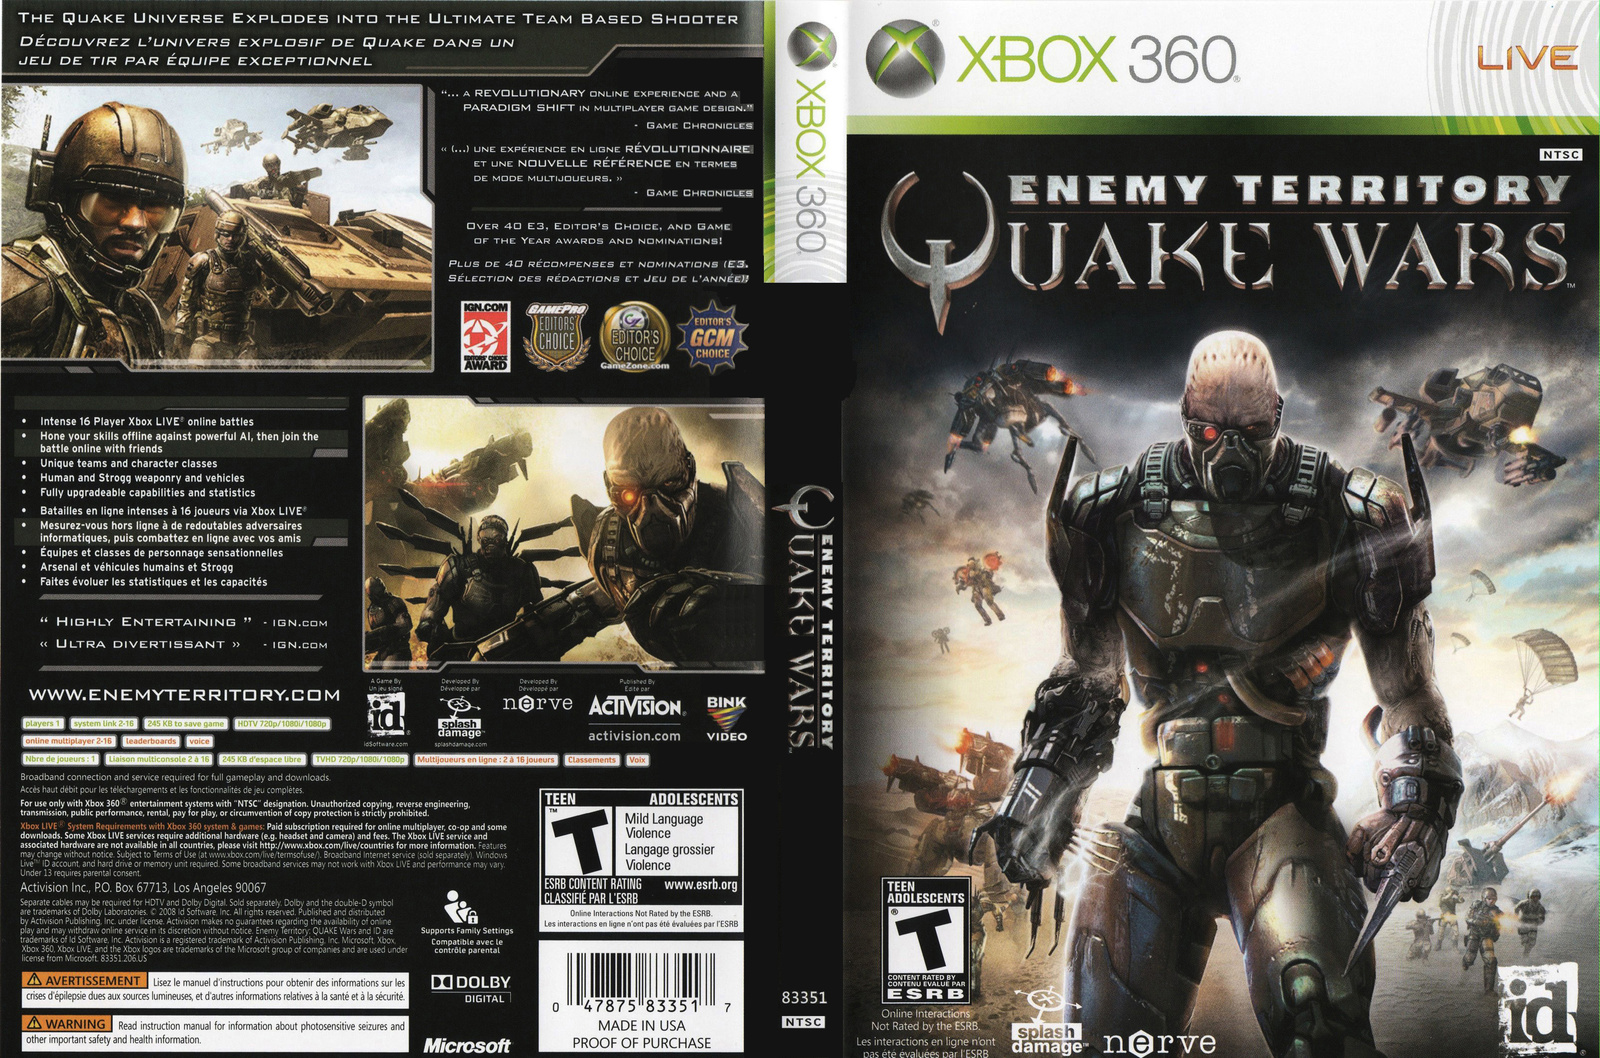 enemy.territory.quake.wars.dvd-front